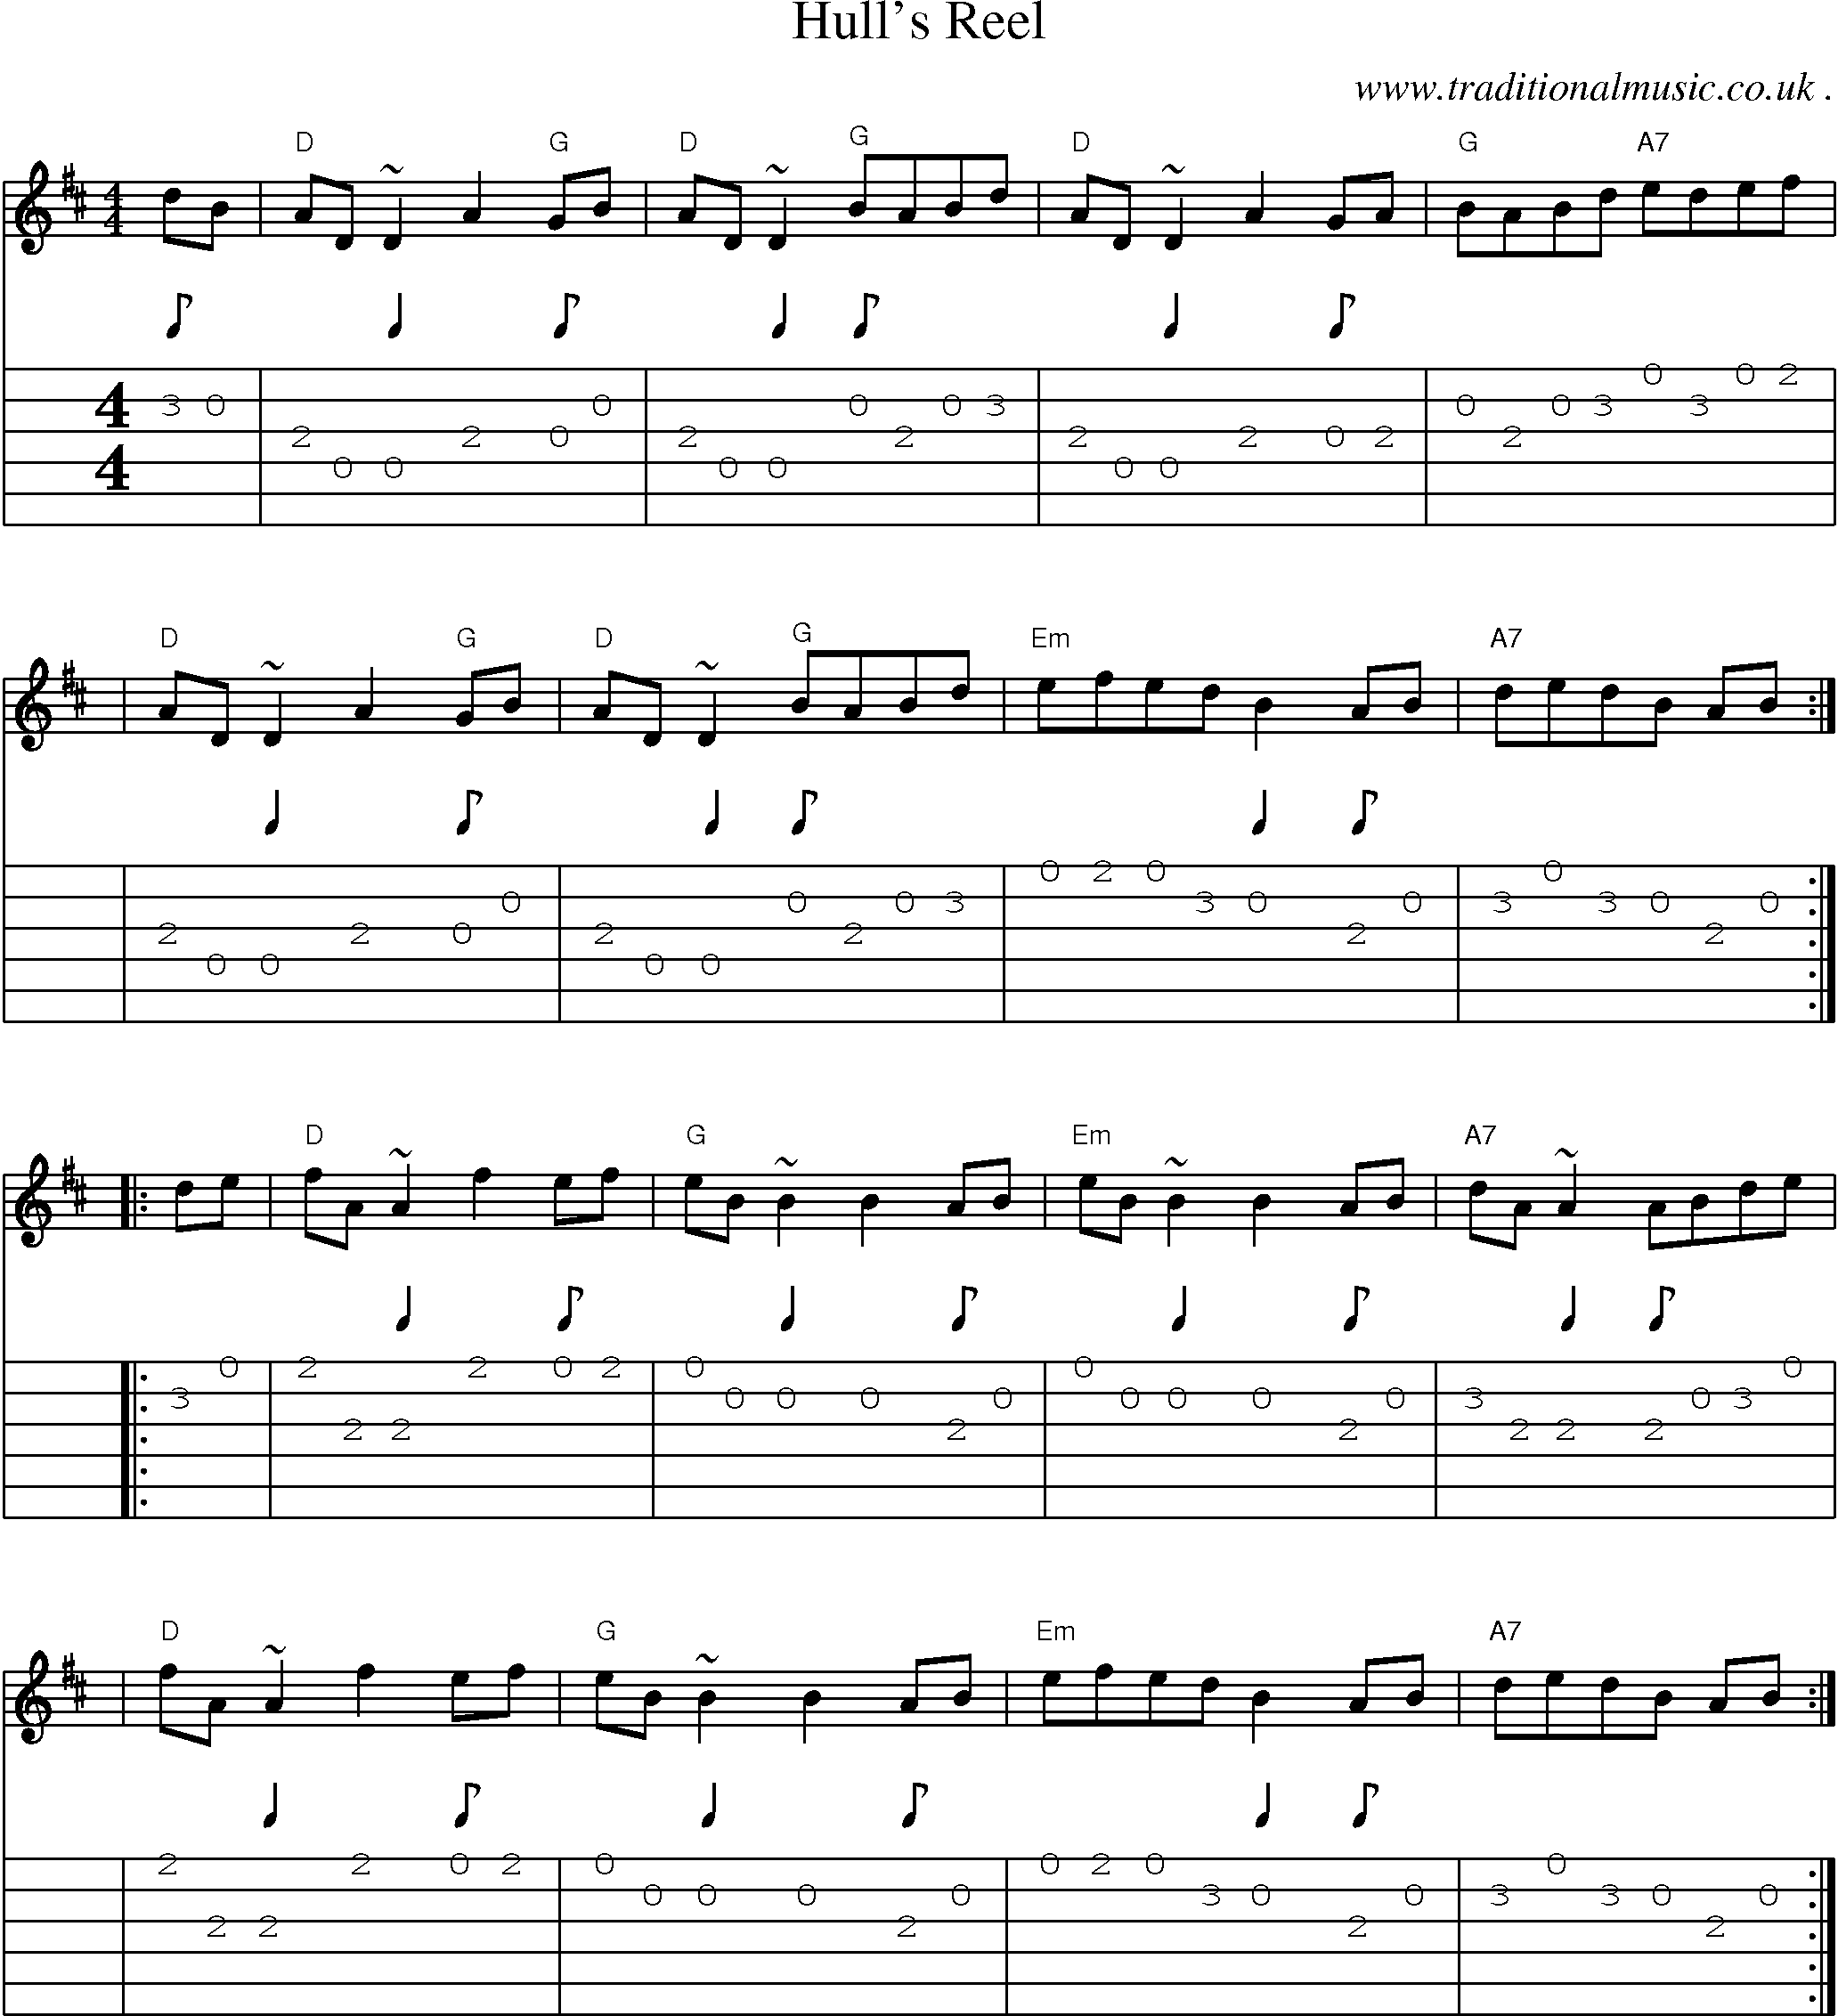 Sheet-music  score, Chords and Guitar Tabs for Hulls Reel